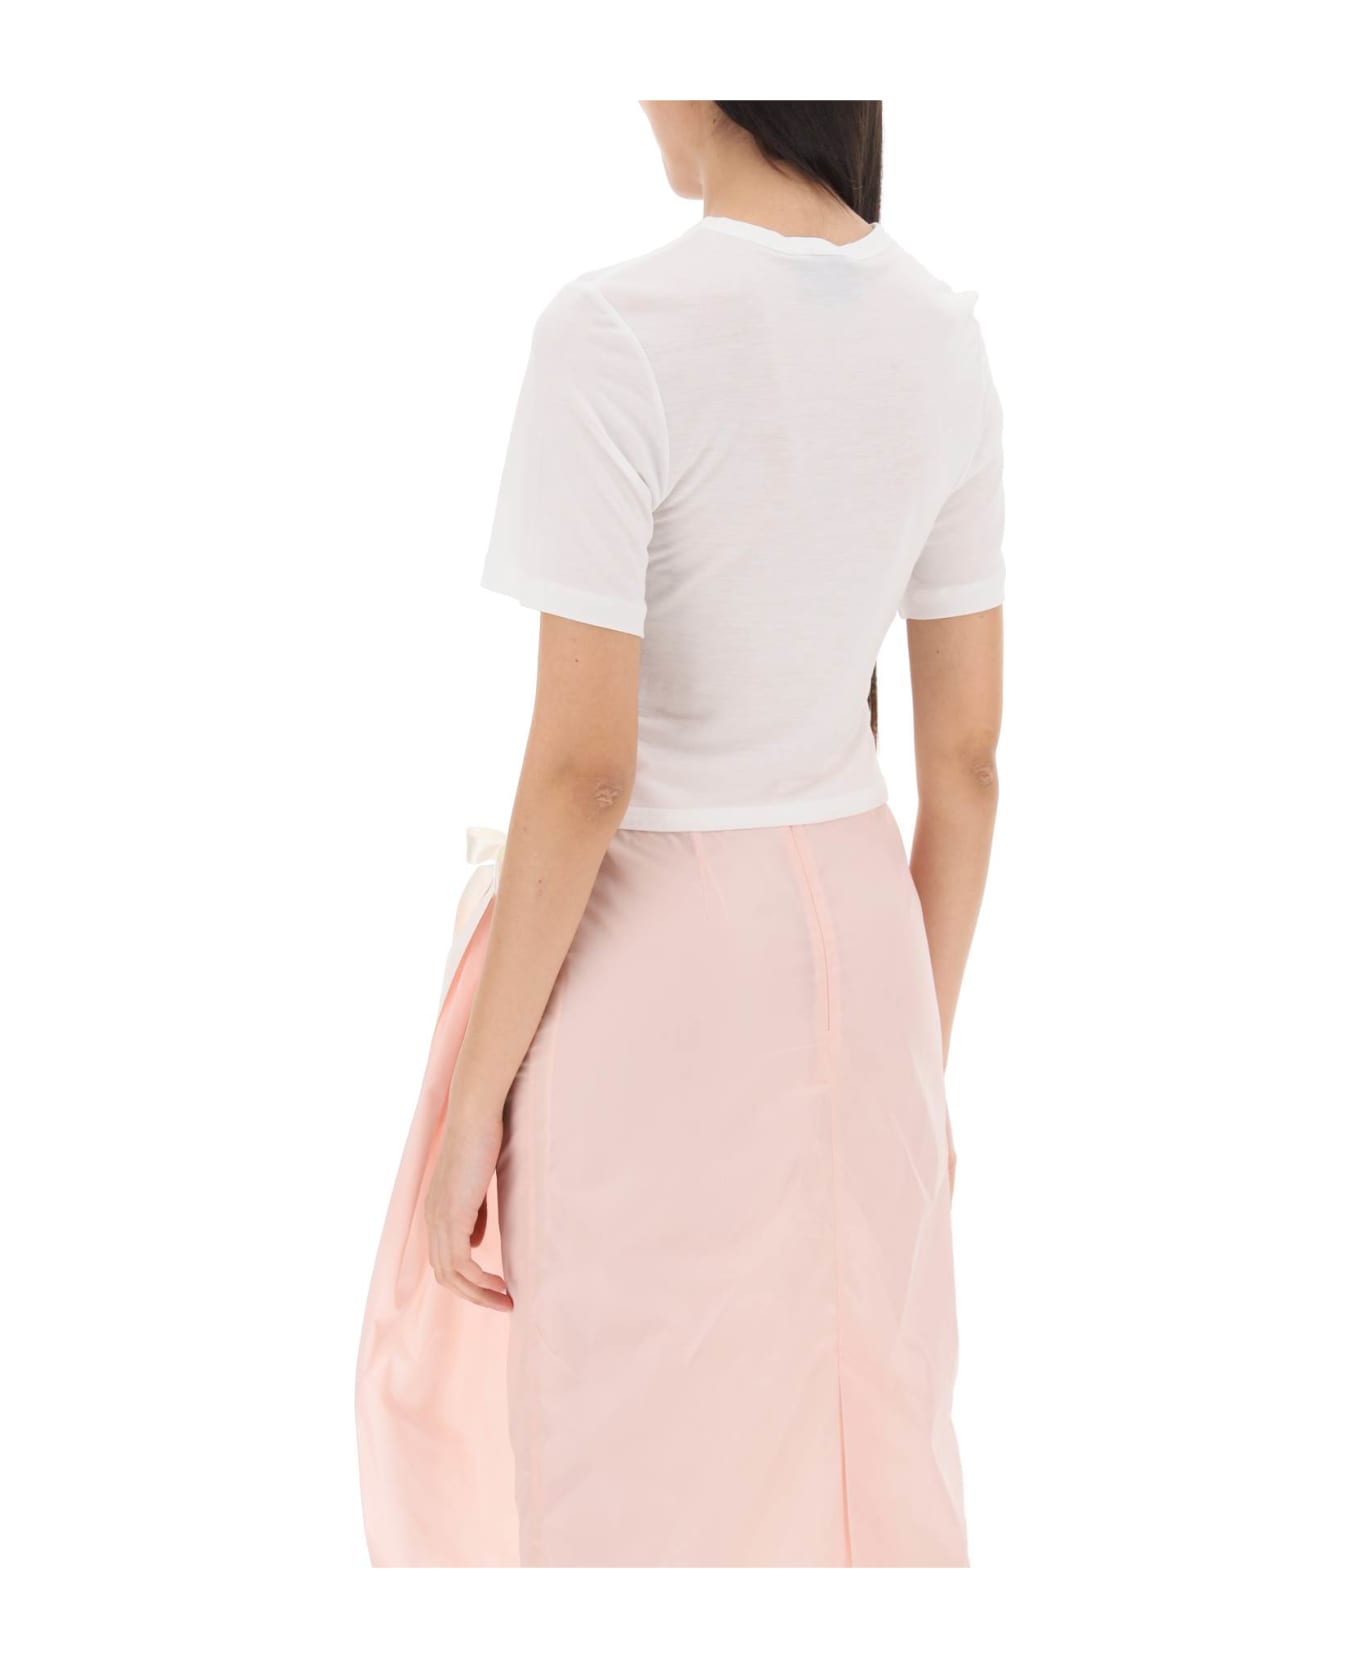 Simone Rocha Easy T-shirt With Bow Tails - IVORY (White)